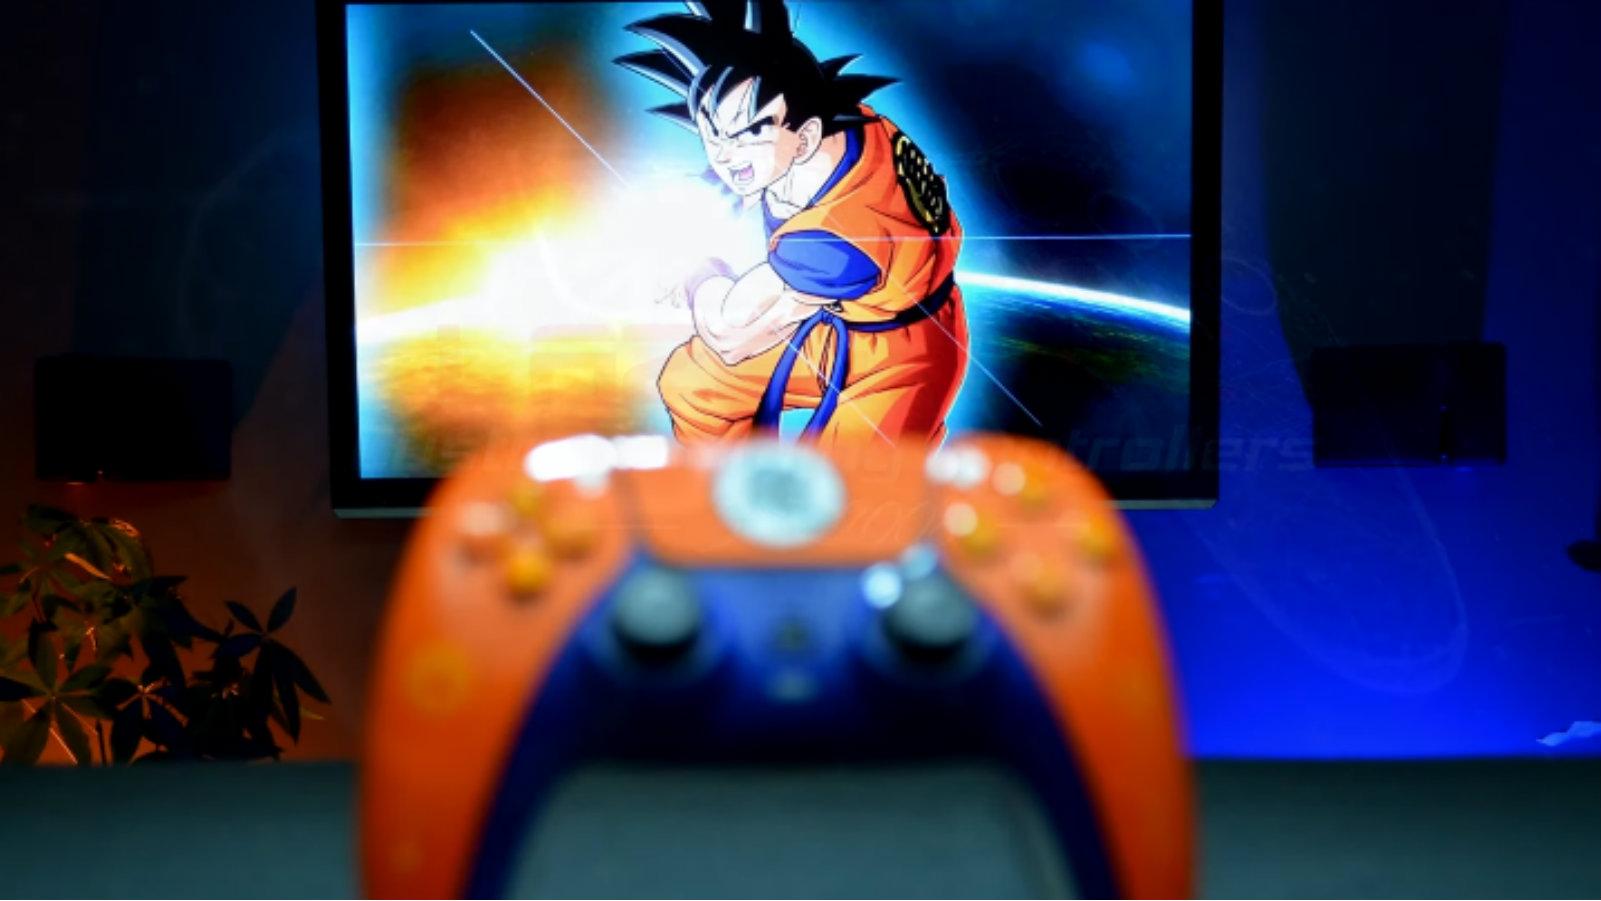 World's first custom PS5 controller revealed with Dragon Ball Z theme -  Dexerto